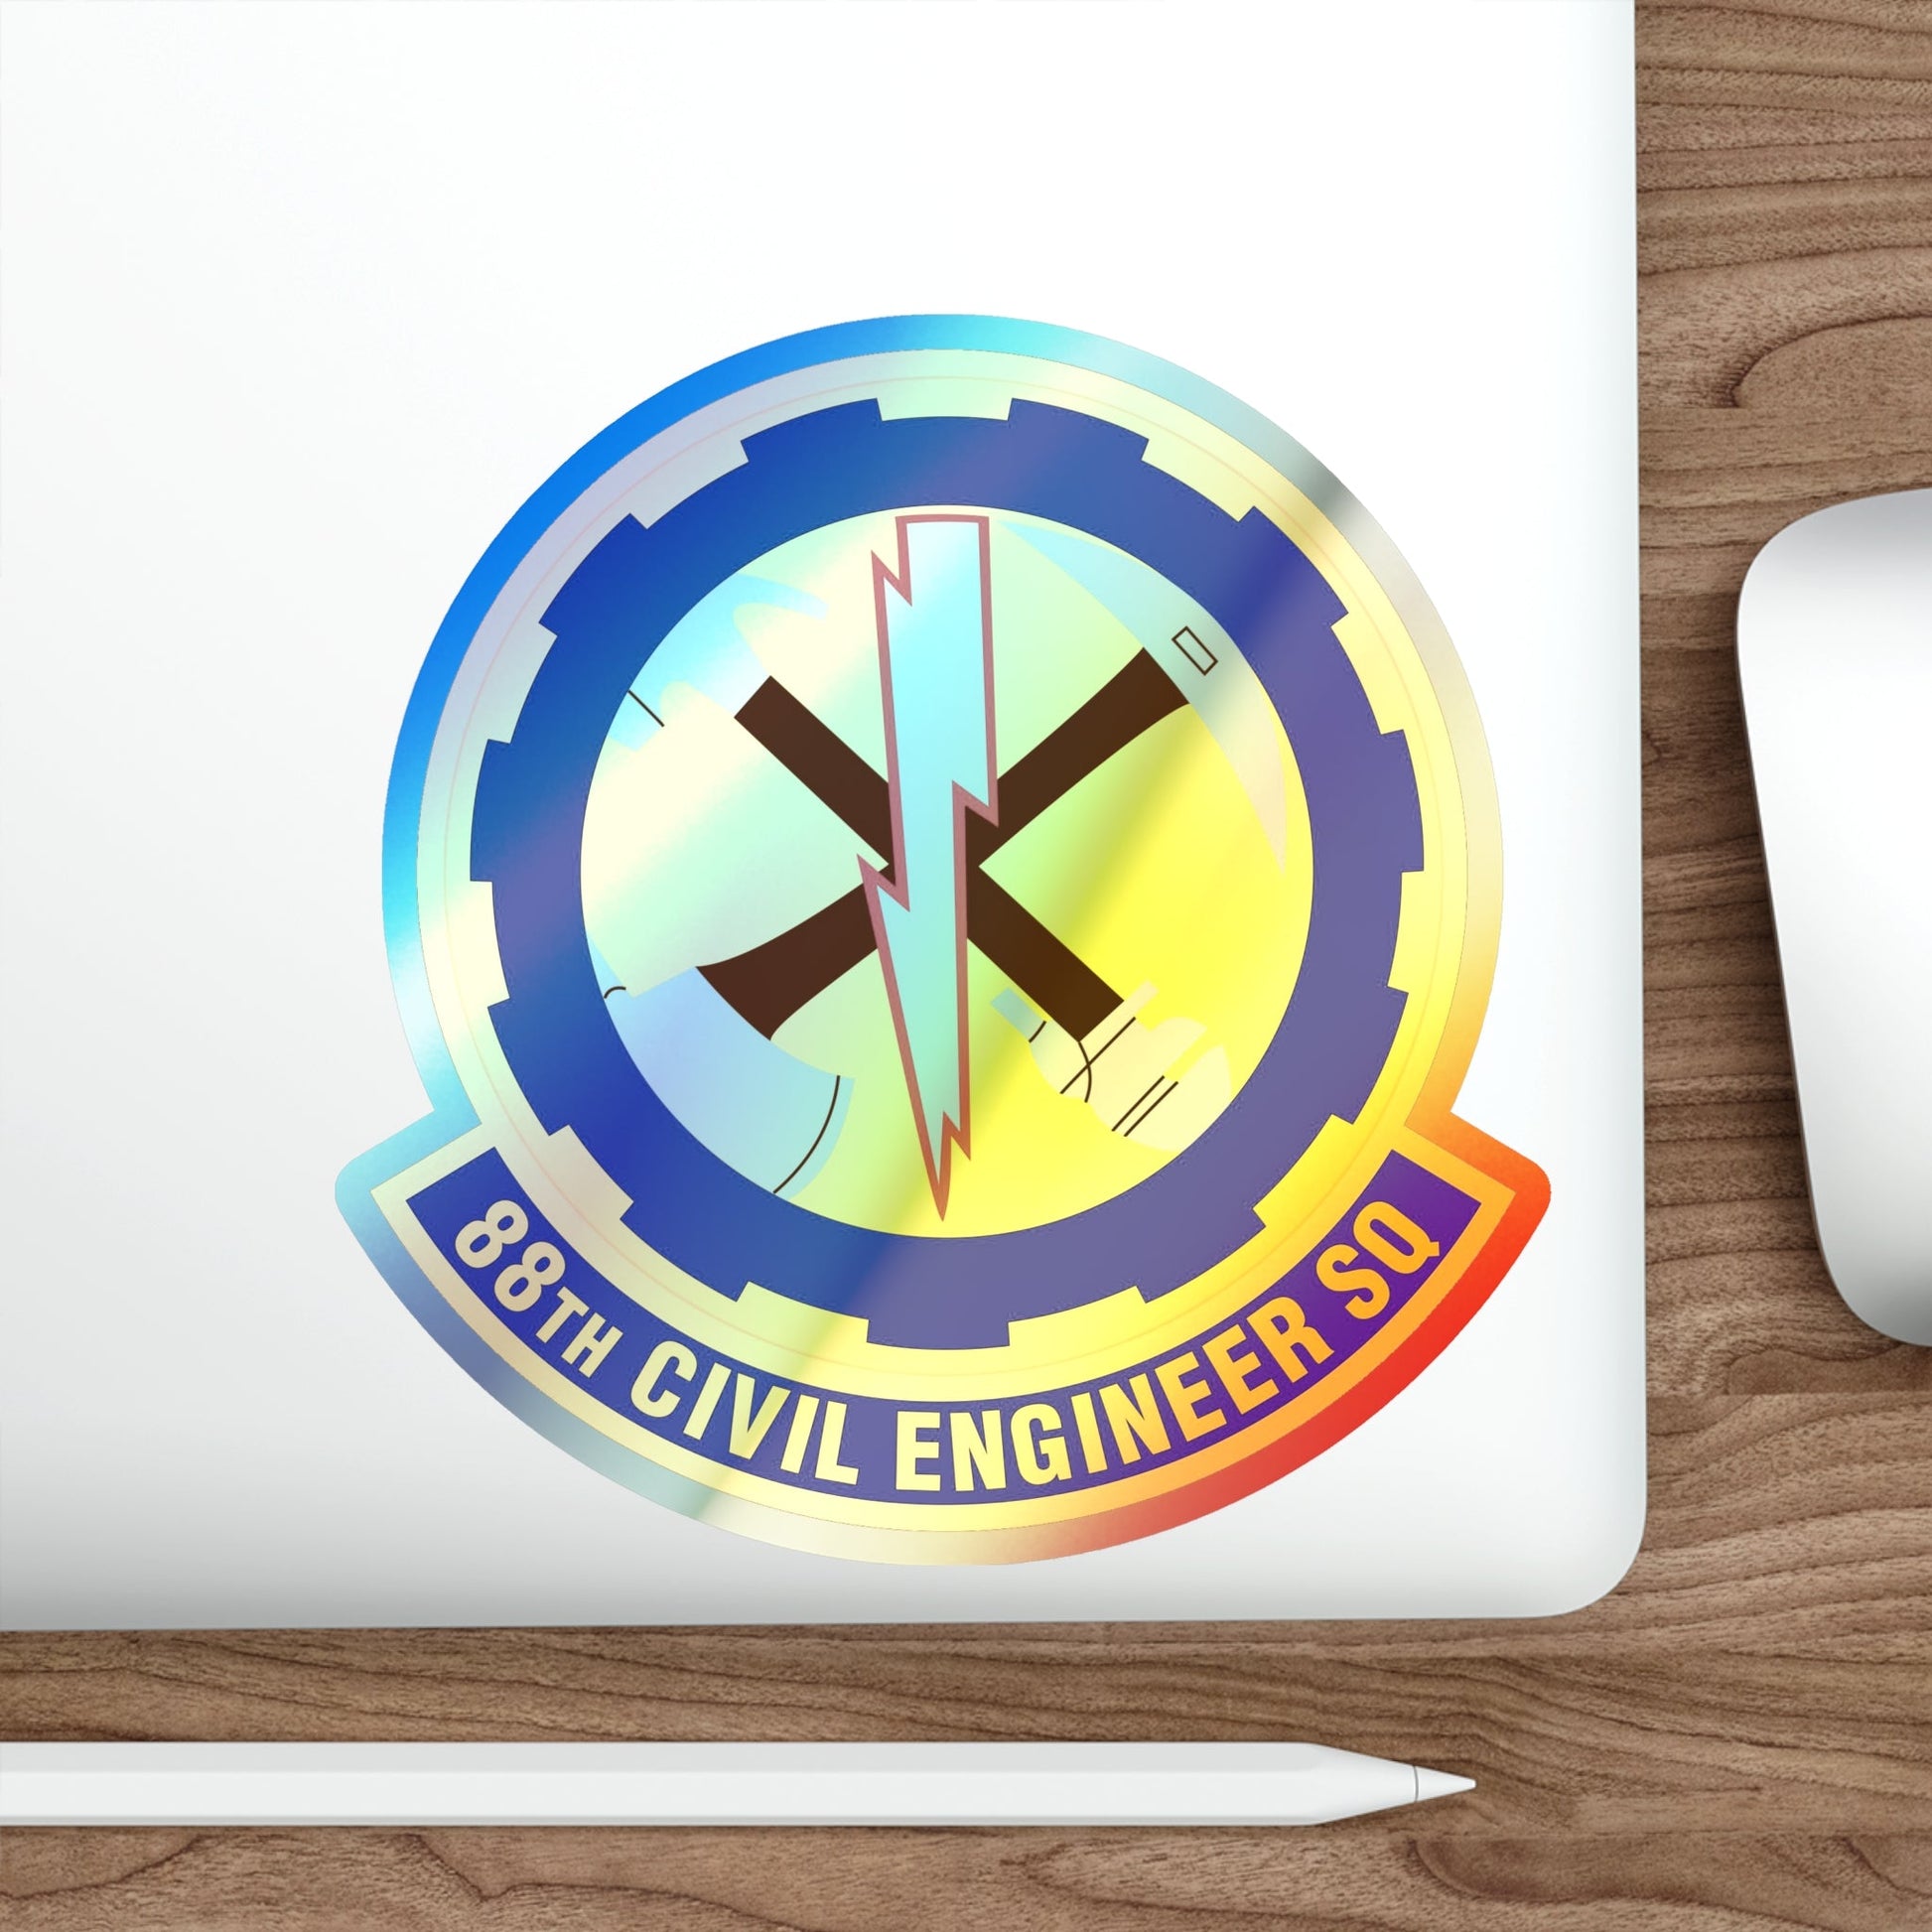 88 Civil Engineer Squadron AFMC (U.S. Air Force) Holographic STICKER Die-Cut Vinyl Decal-The Sticker Space